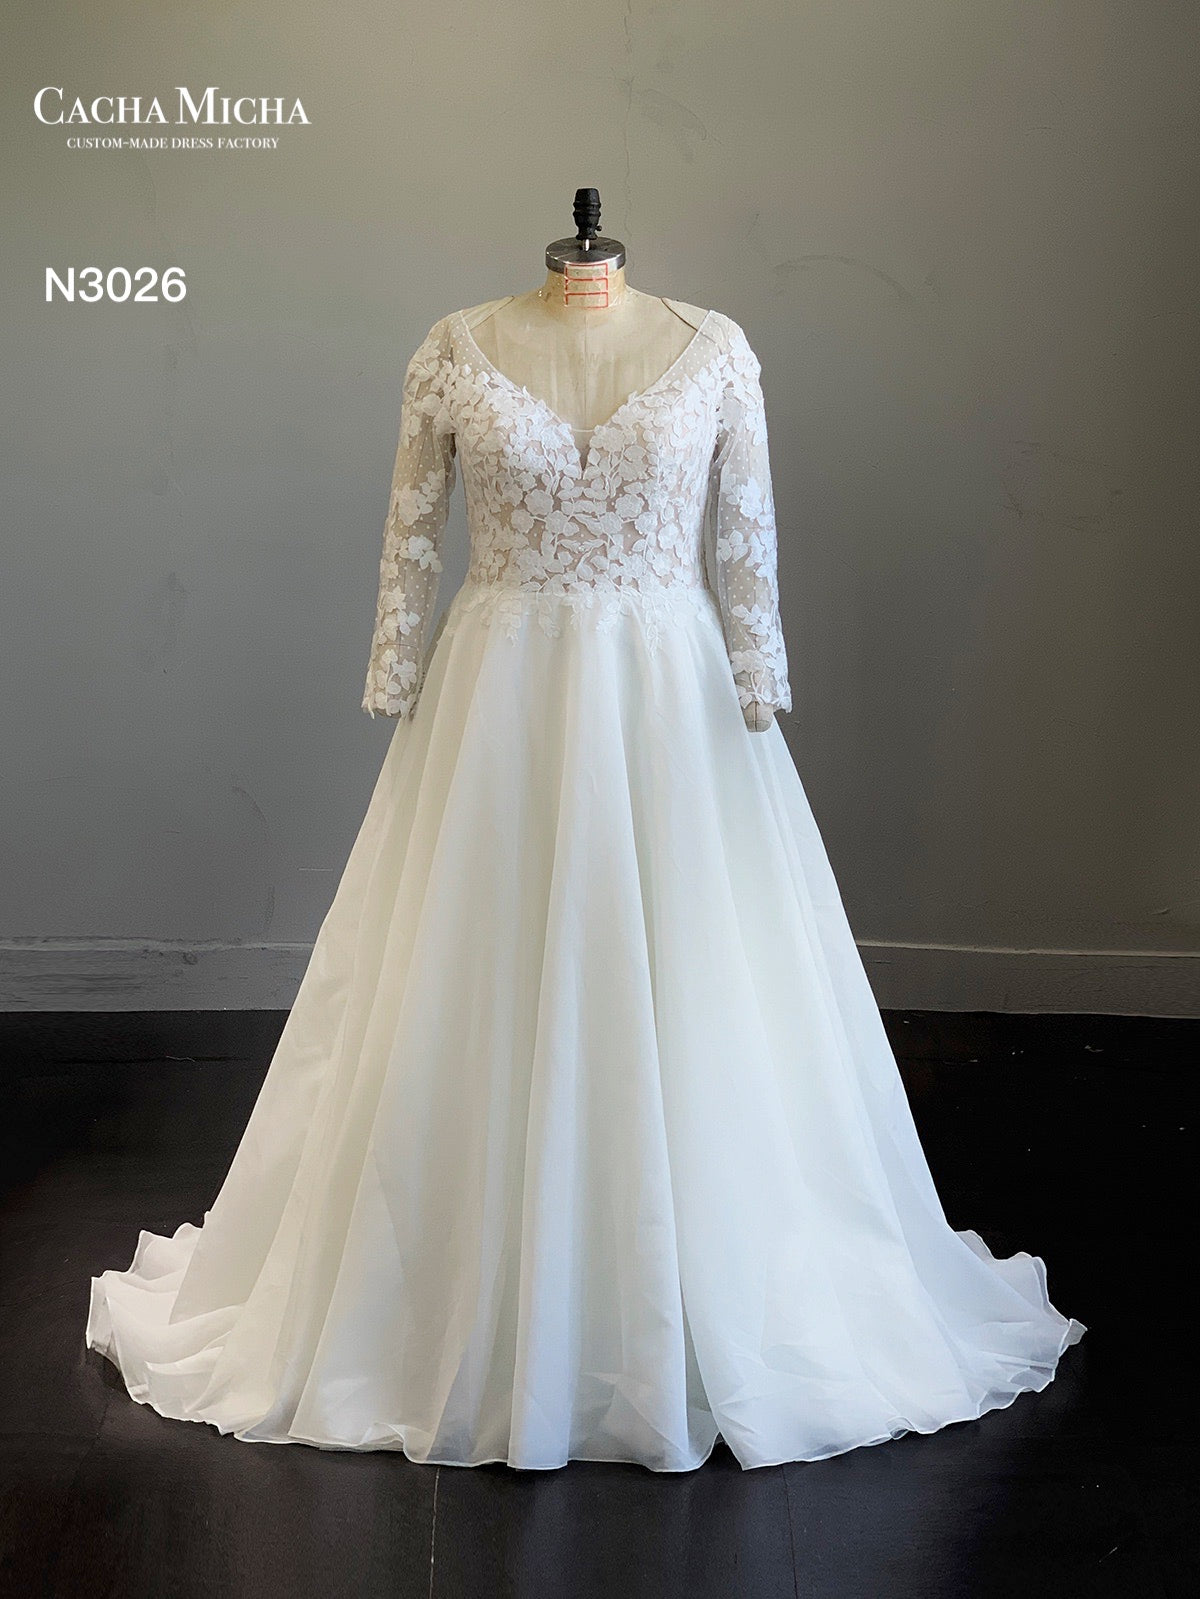 Dotted Lace Long Sleeves Plus Size Wedding Dress N3026